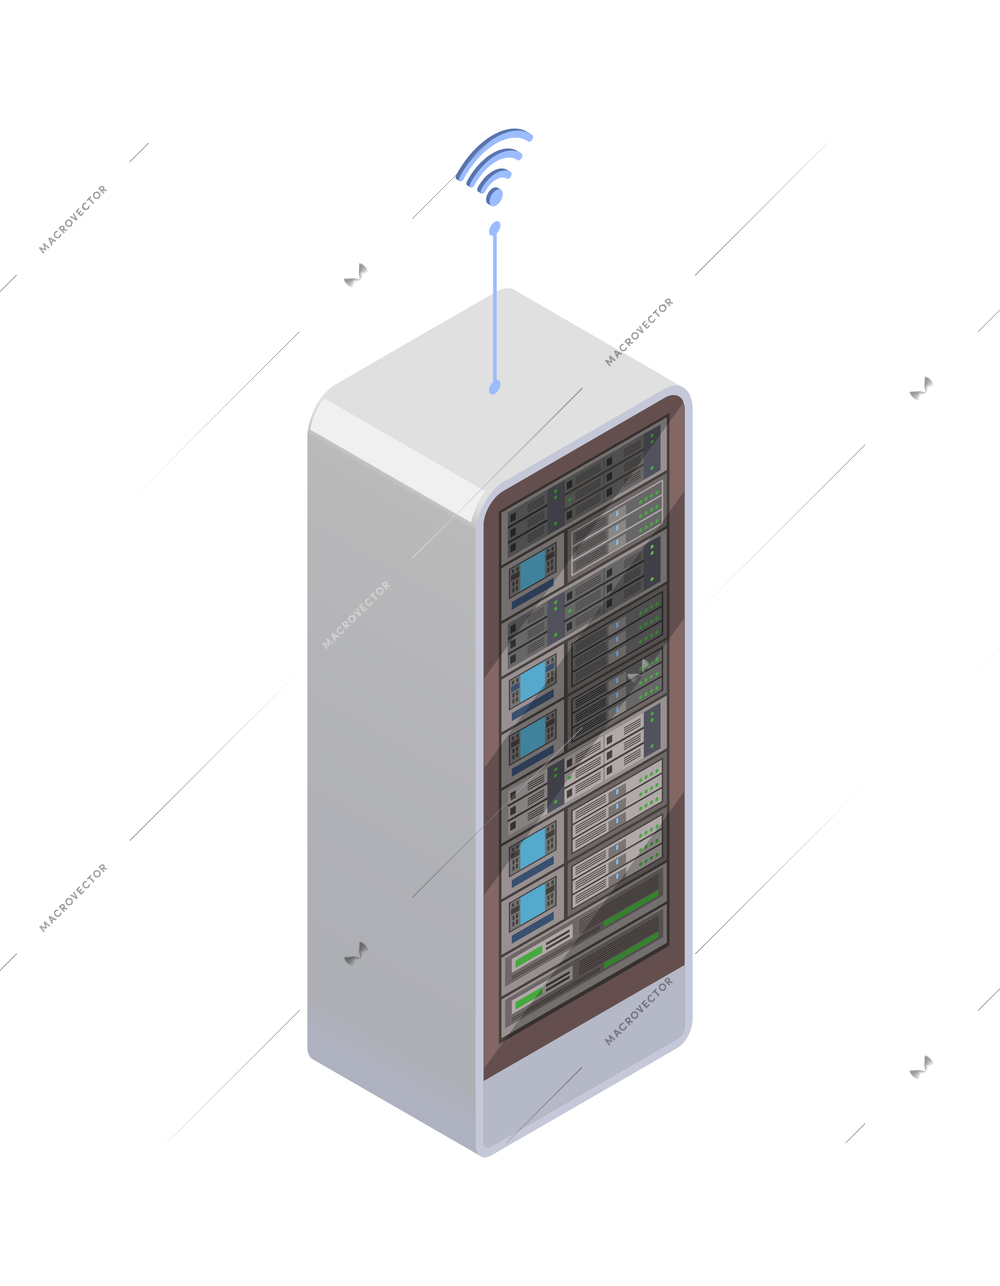 Smart industry isometric icon with data center rack 3d vector illustration